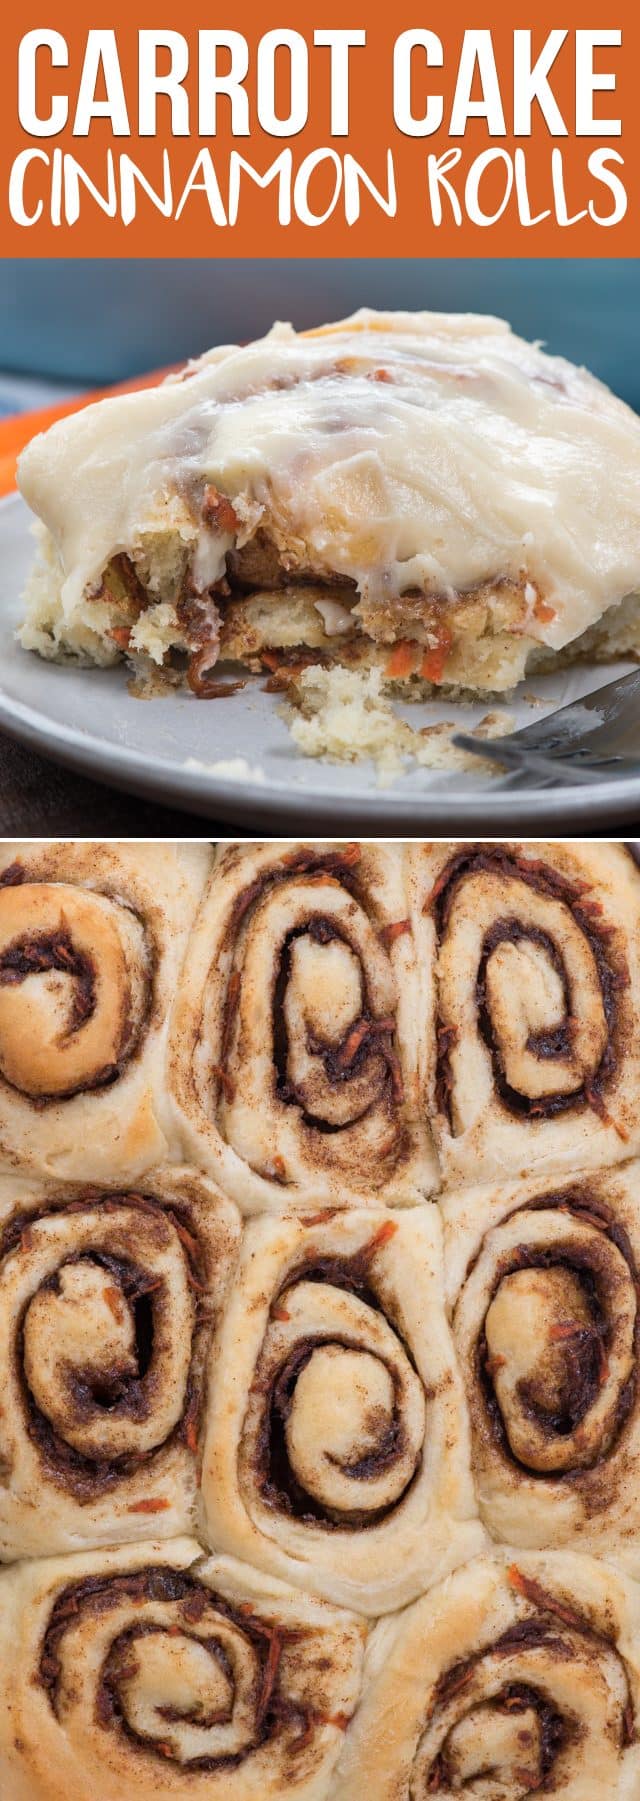 collage of cinnamon roll photos